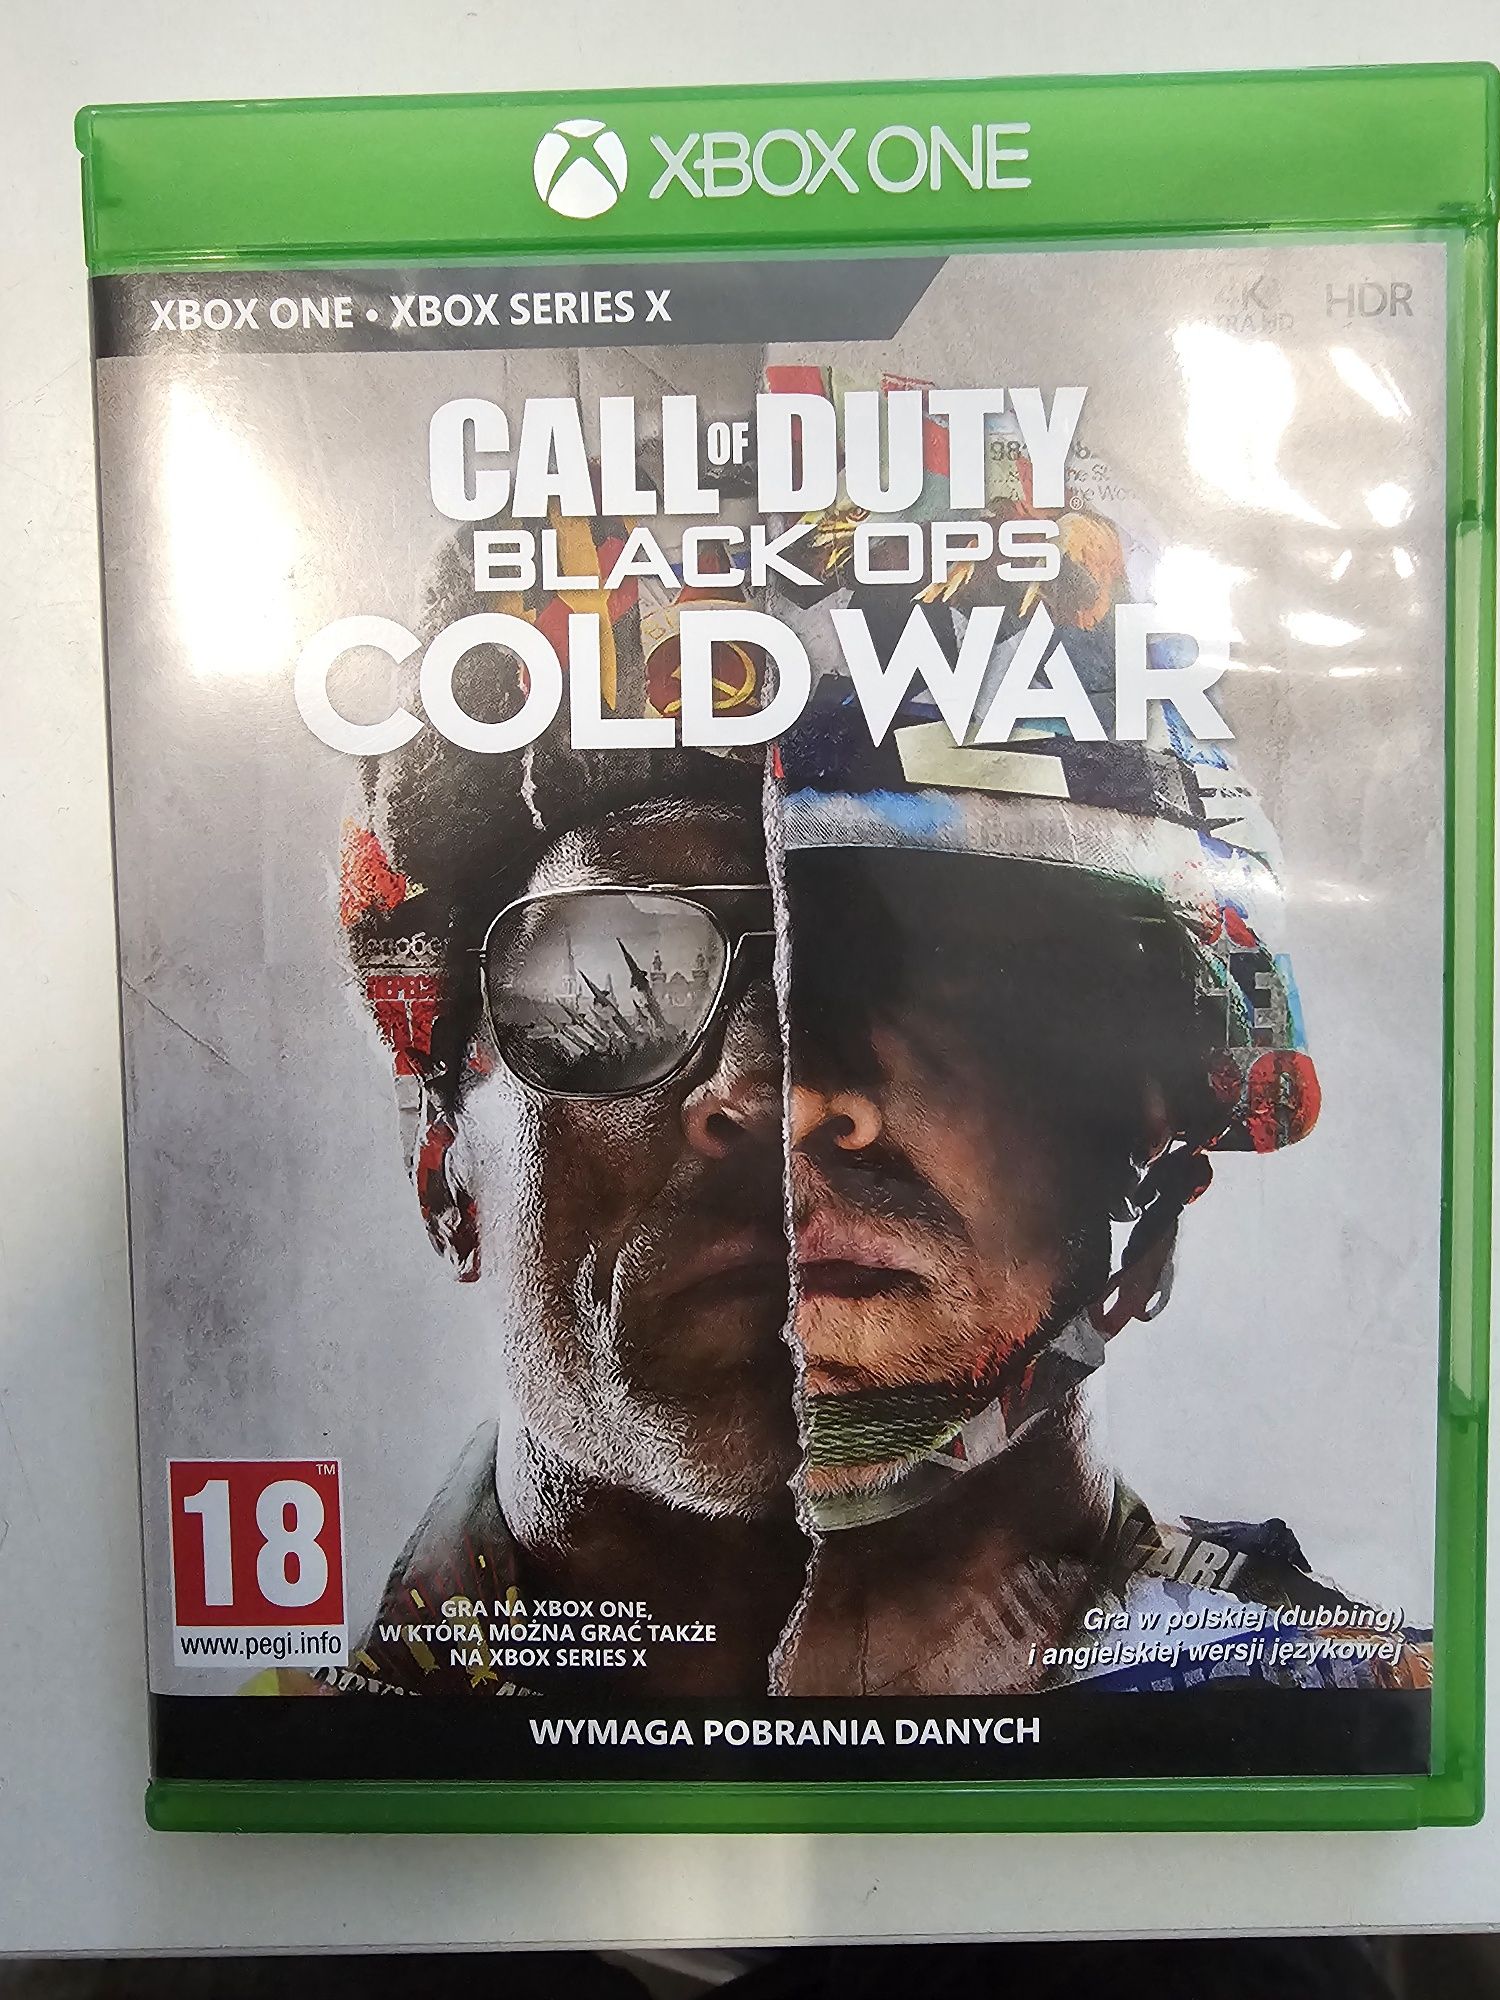 Gra Call of Duty Black Ops Cold War na Xbox One